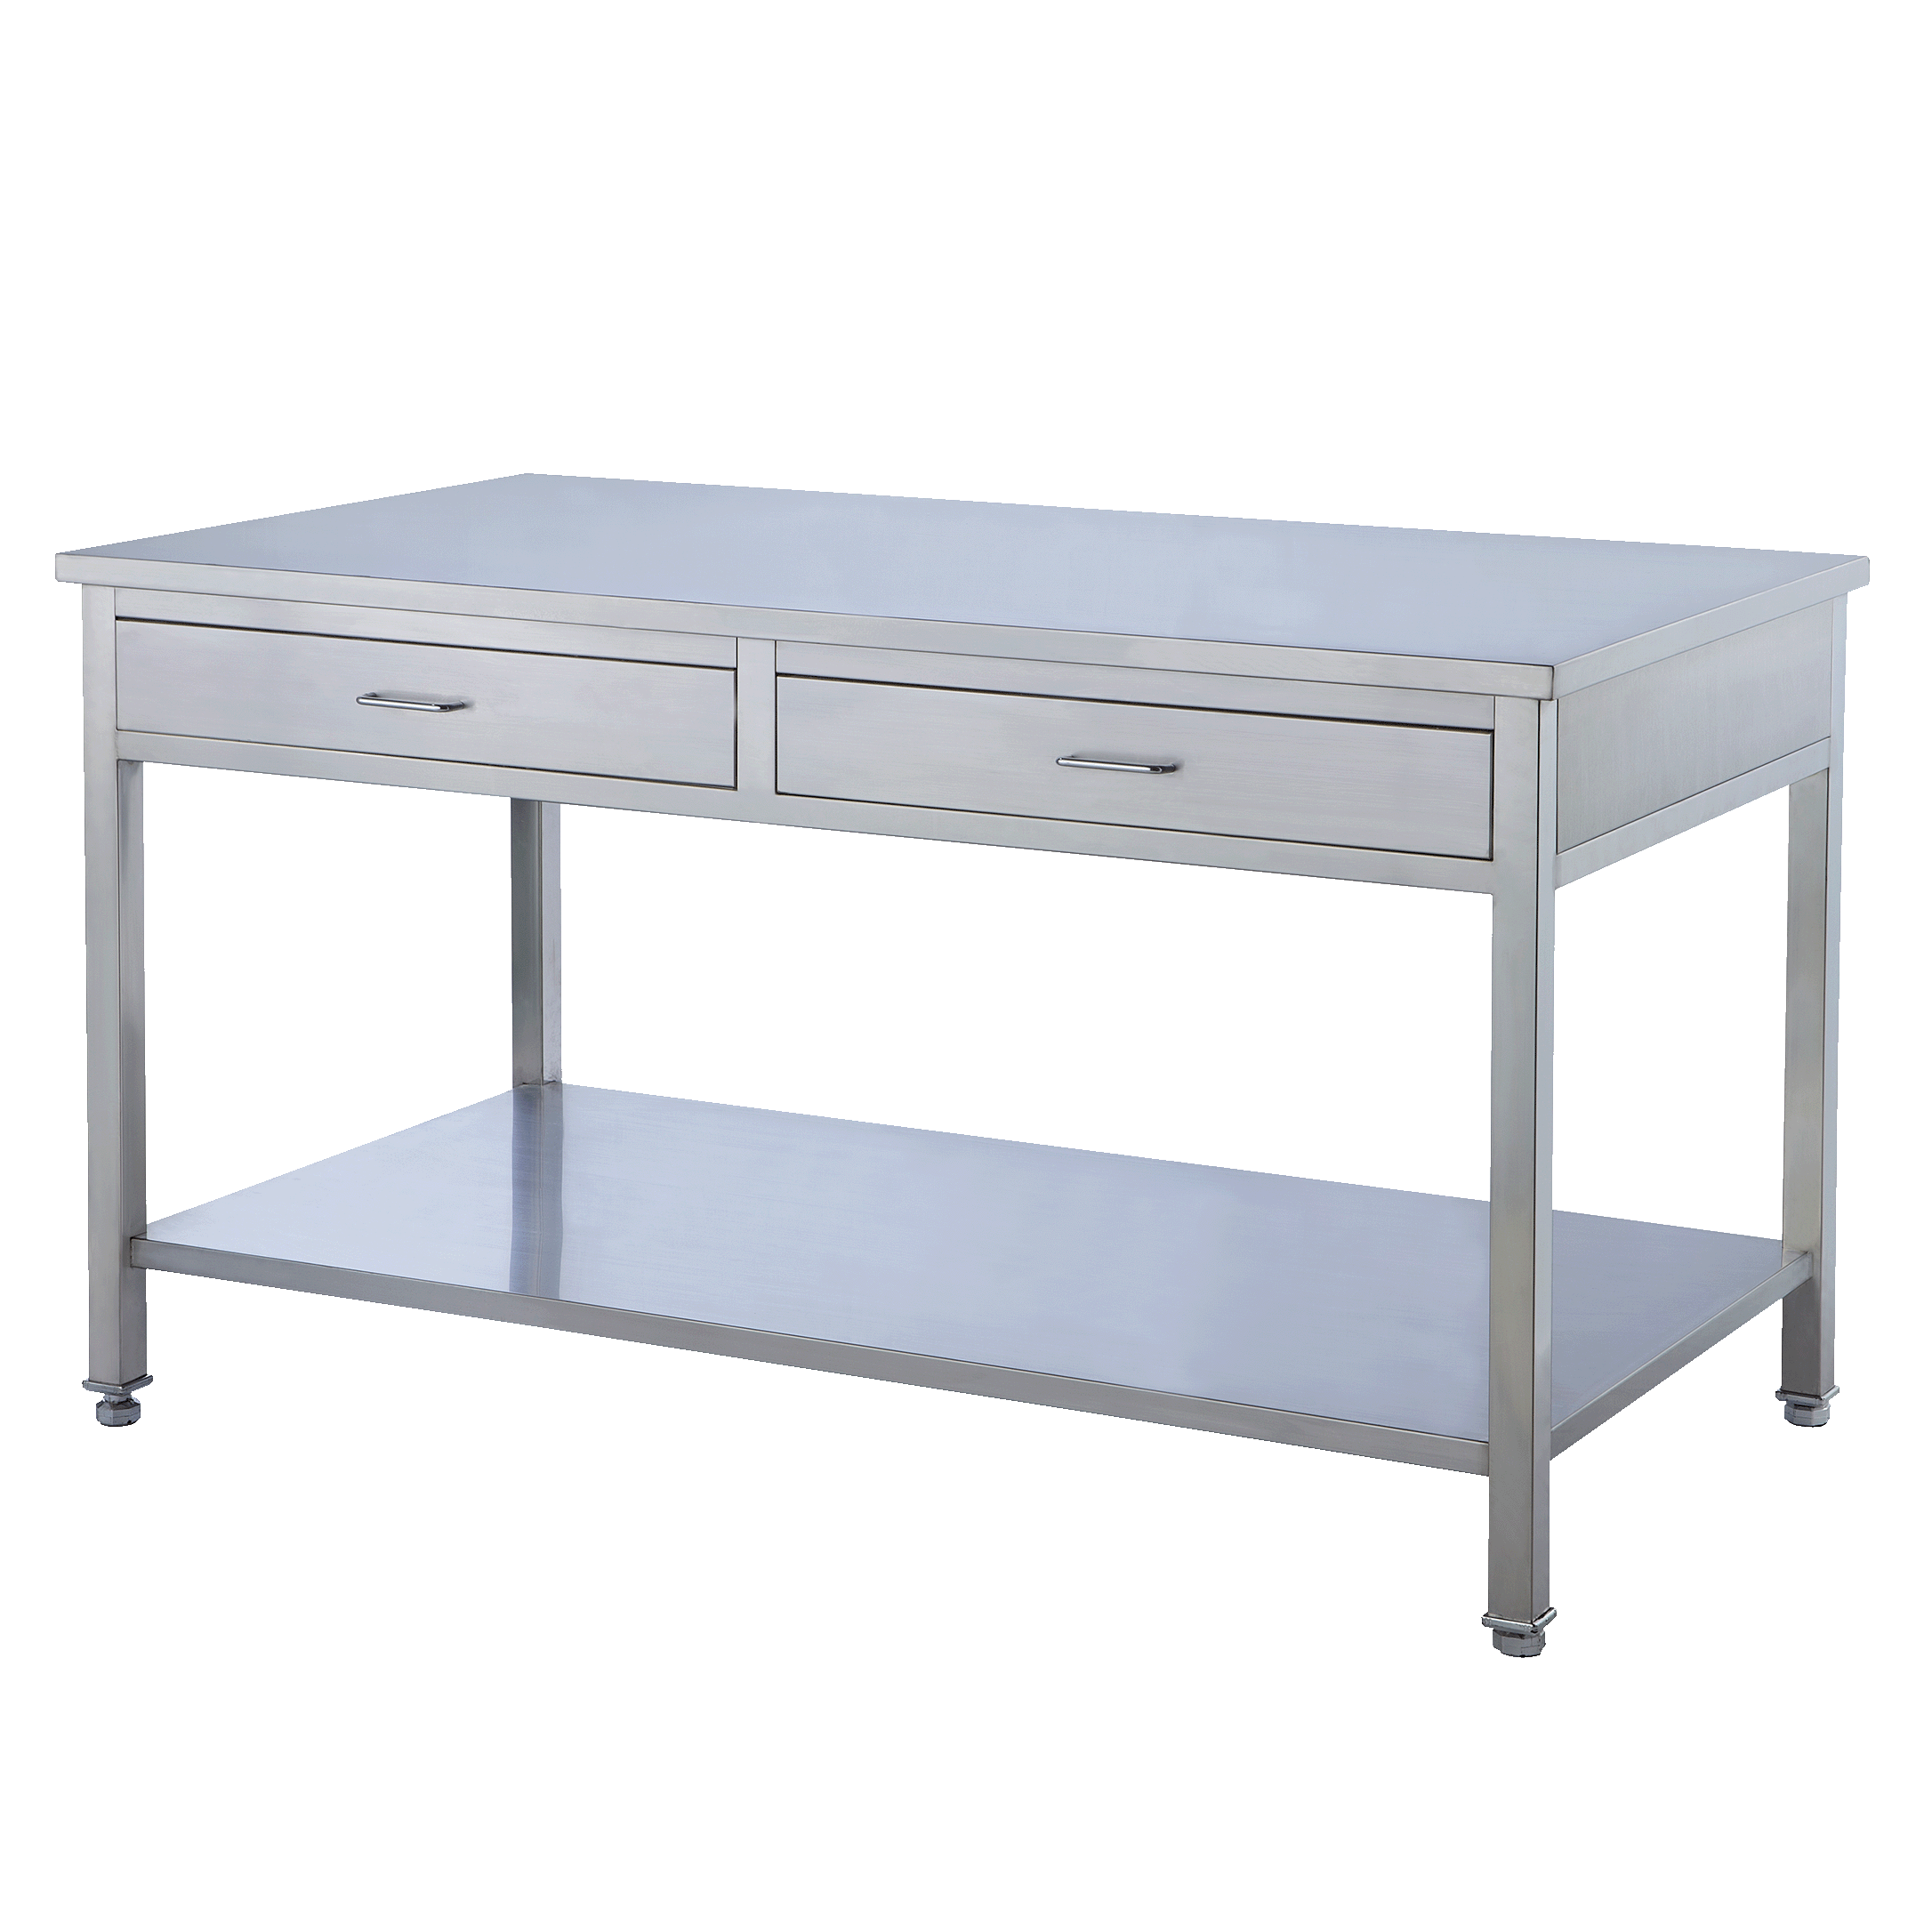 Stainless Table main mini size images